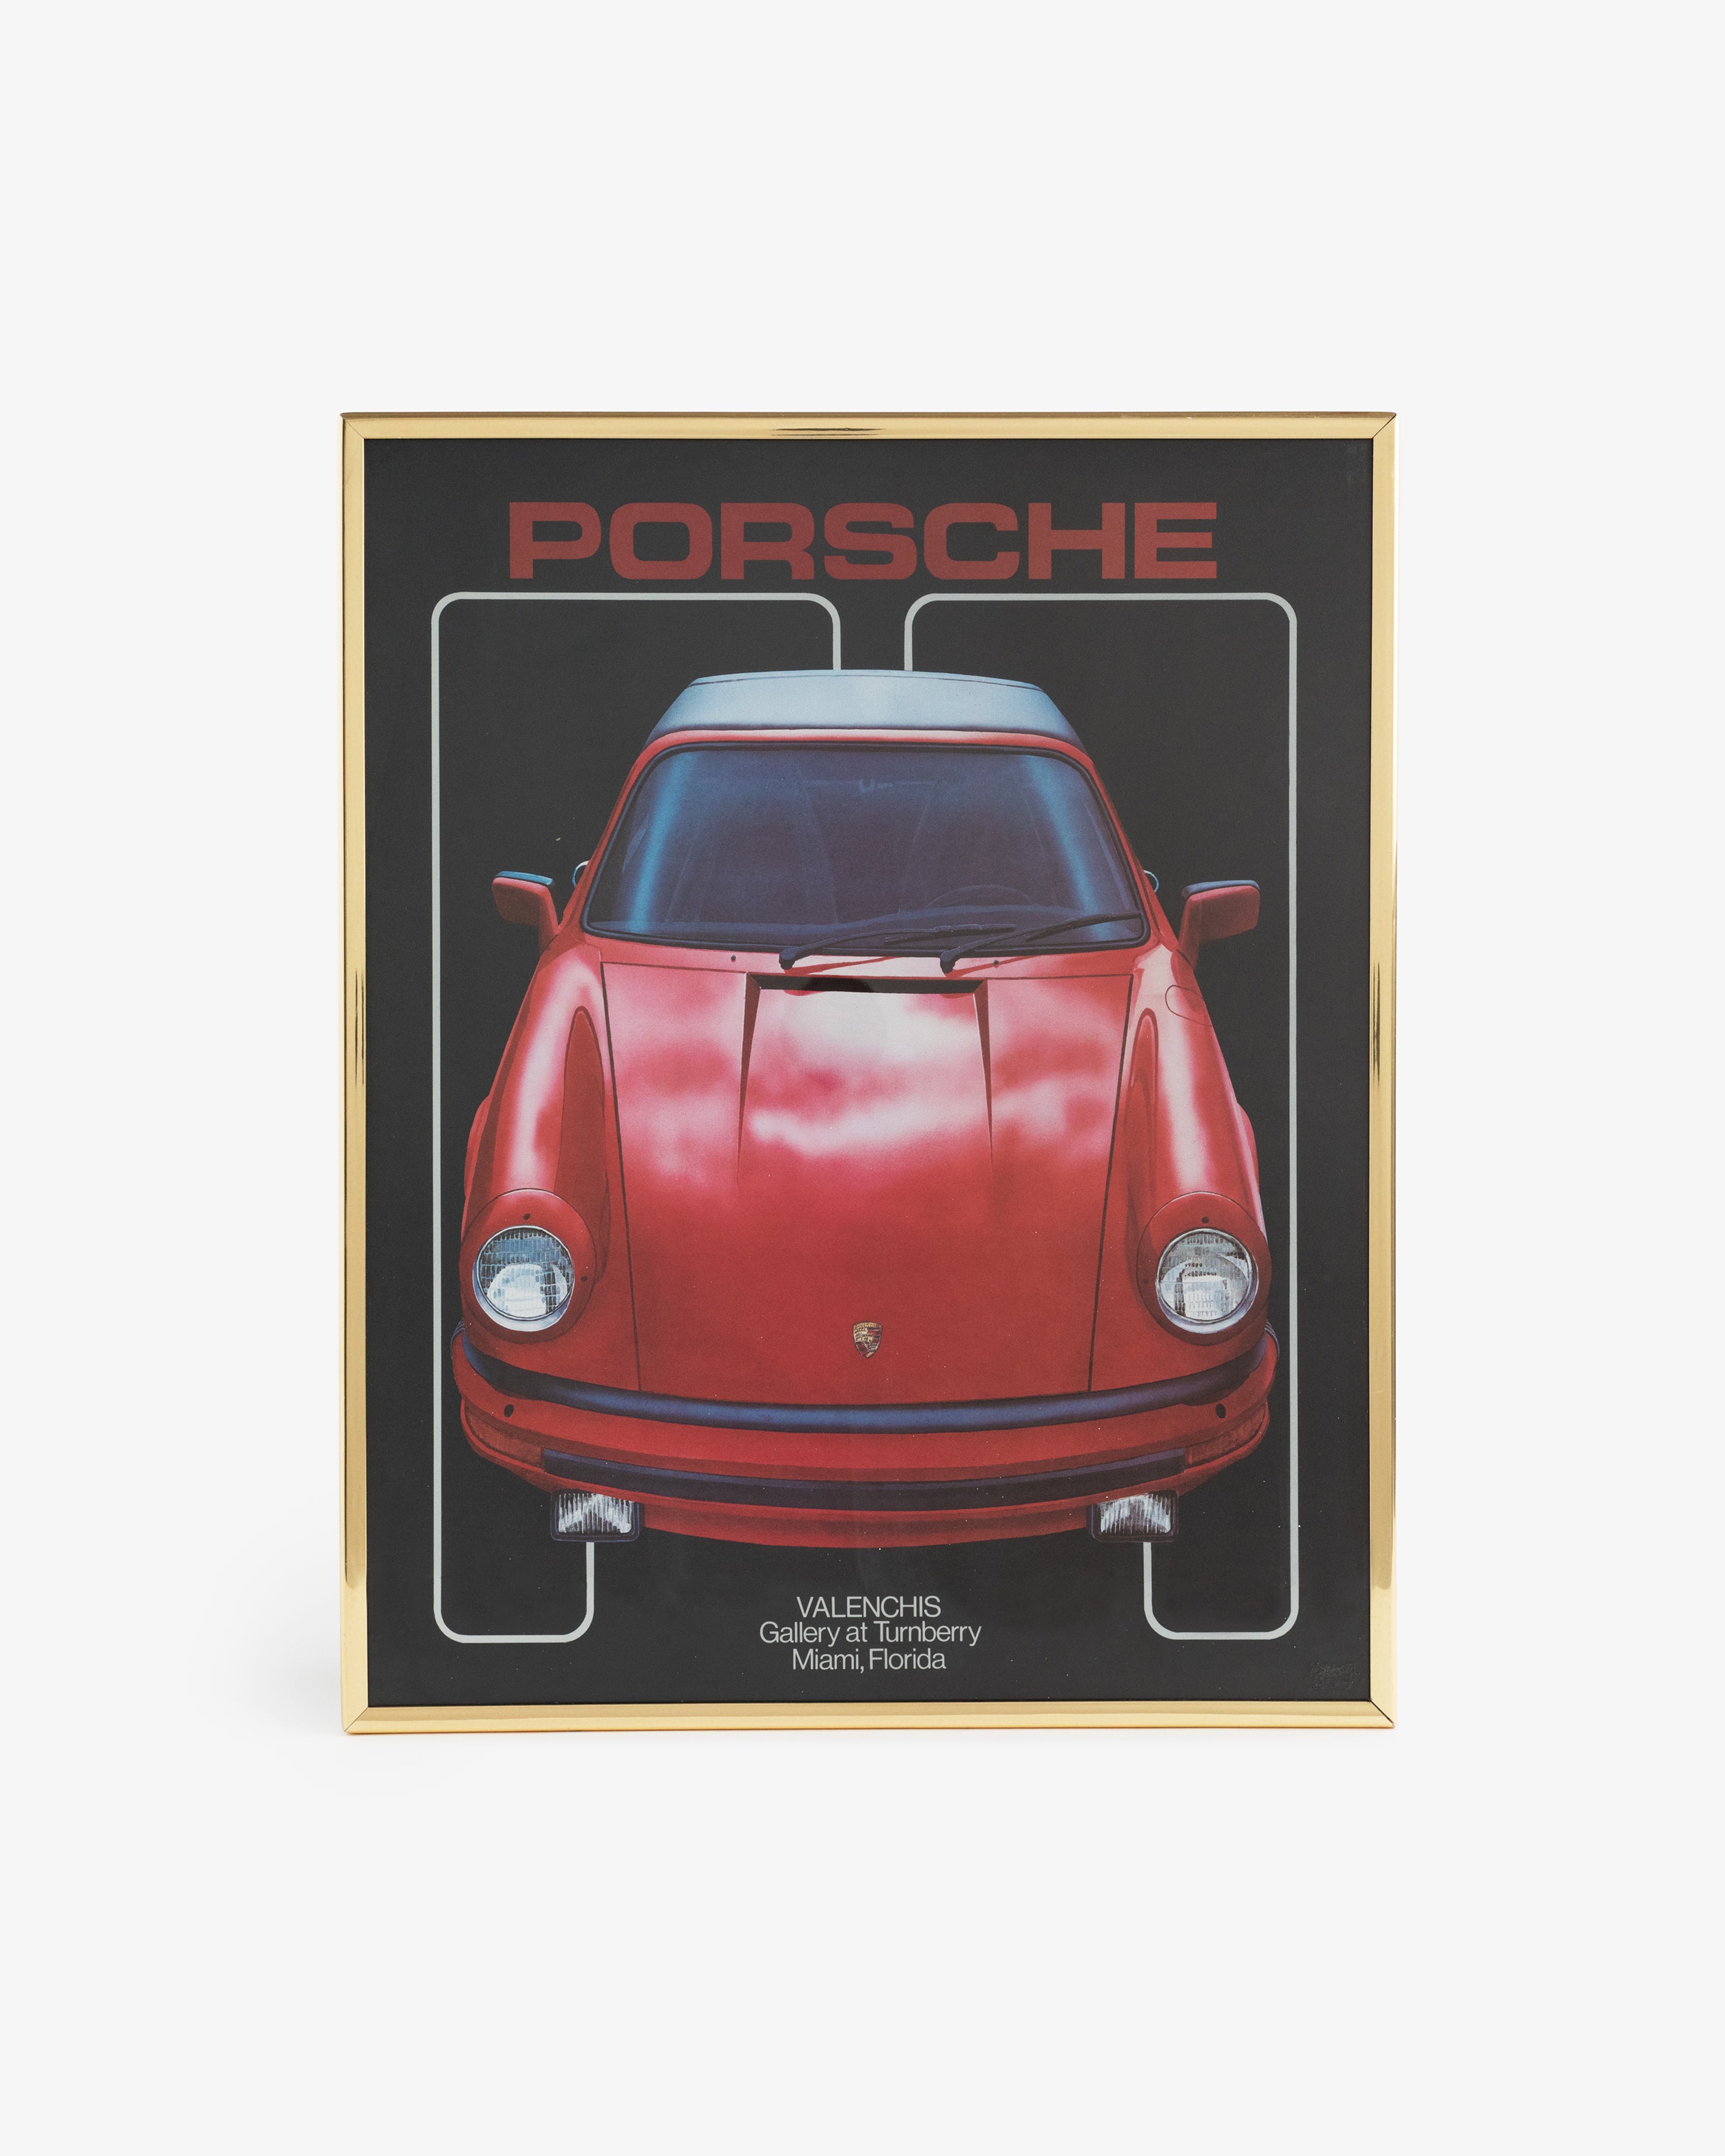 Porsche Valenchis Gallery at Turnberry Poster